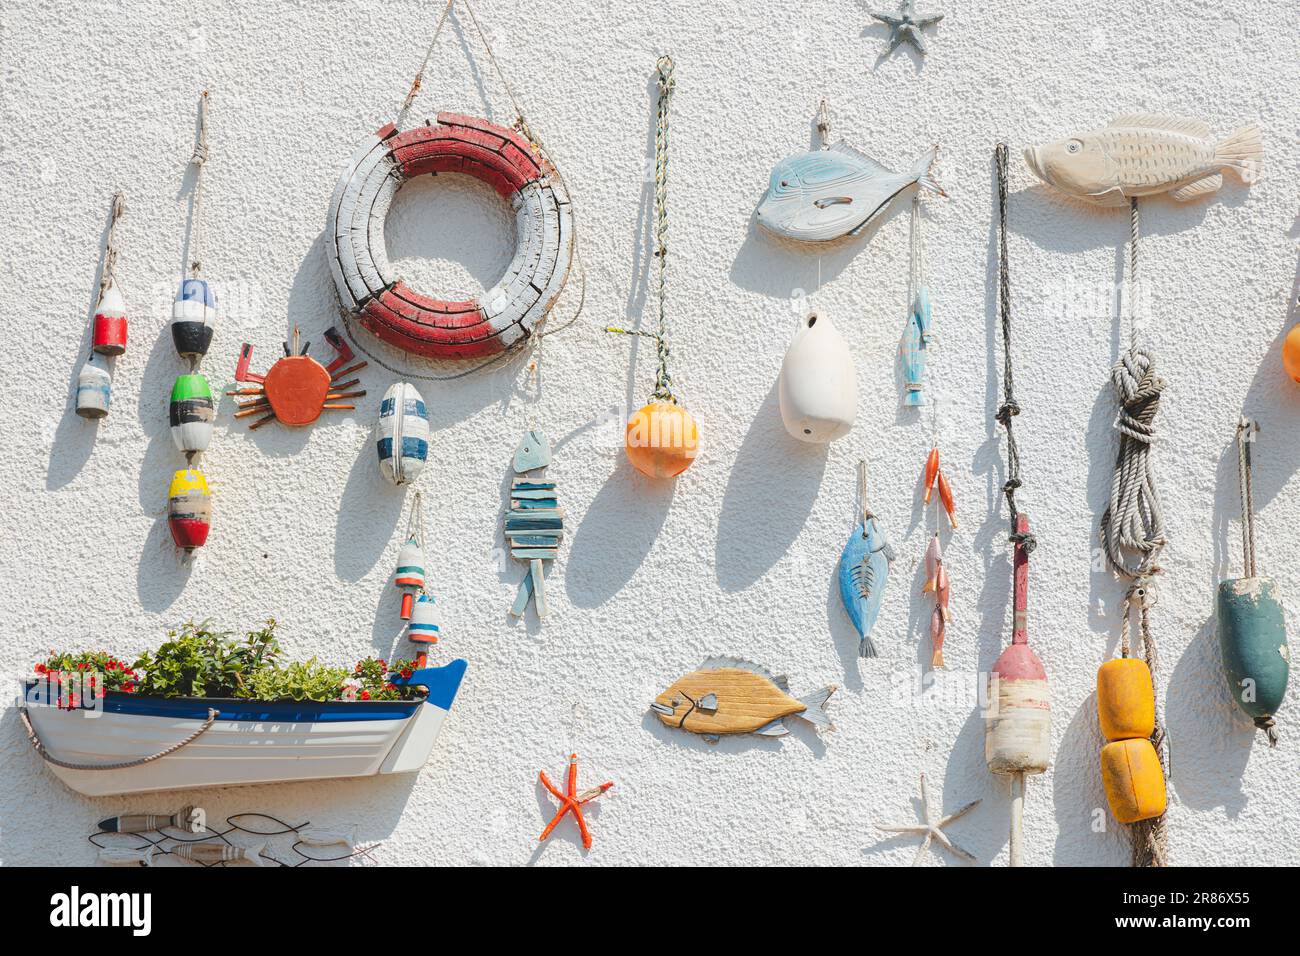 Nautical themed fishing gear, artifacts and decoration from the sea on a white wash pebbledash wall in the coastal seaside fishing village of Lower La Stock Photo